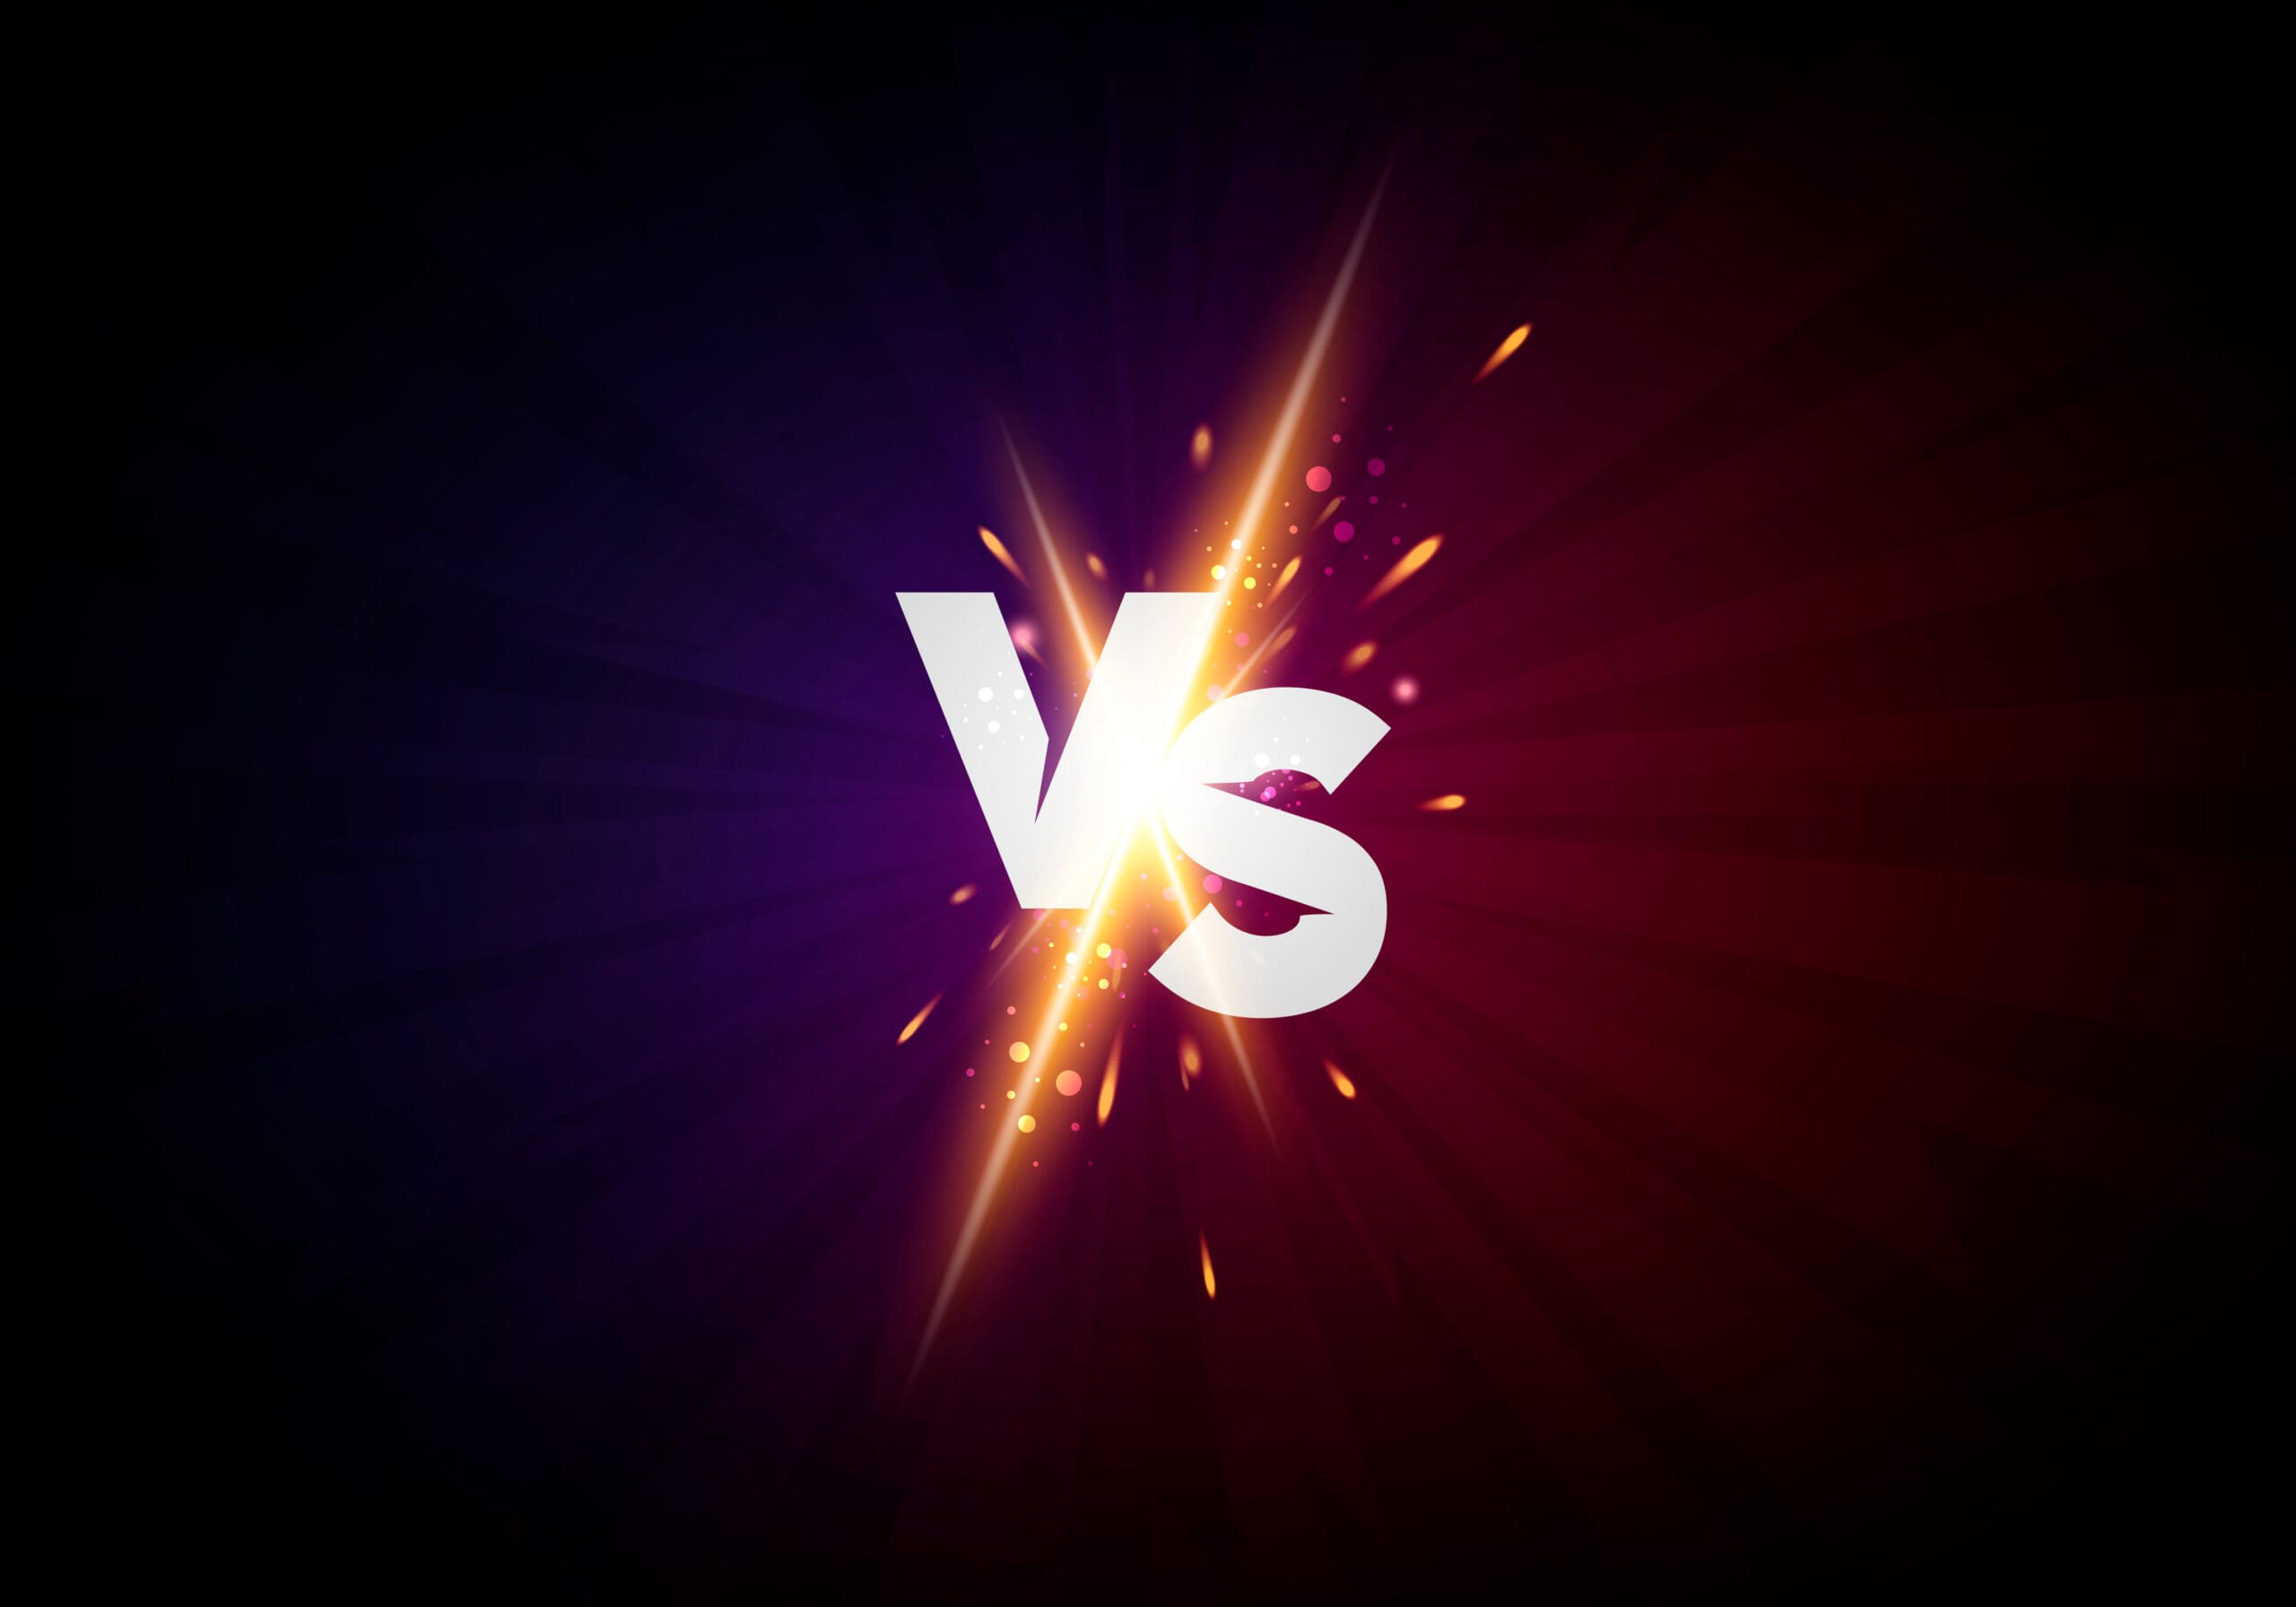 A dynamic "VS" graphic with a dark background is divided into blue on the left and red on the right. Bright yellow and orange sparks explode from the center, illuminating the bold white "VS" text, symbolizing the fiery and intense visual contrast often seen in offshoring debates.